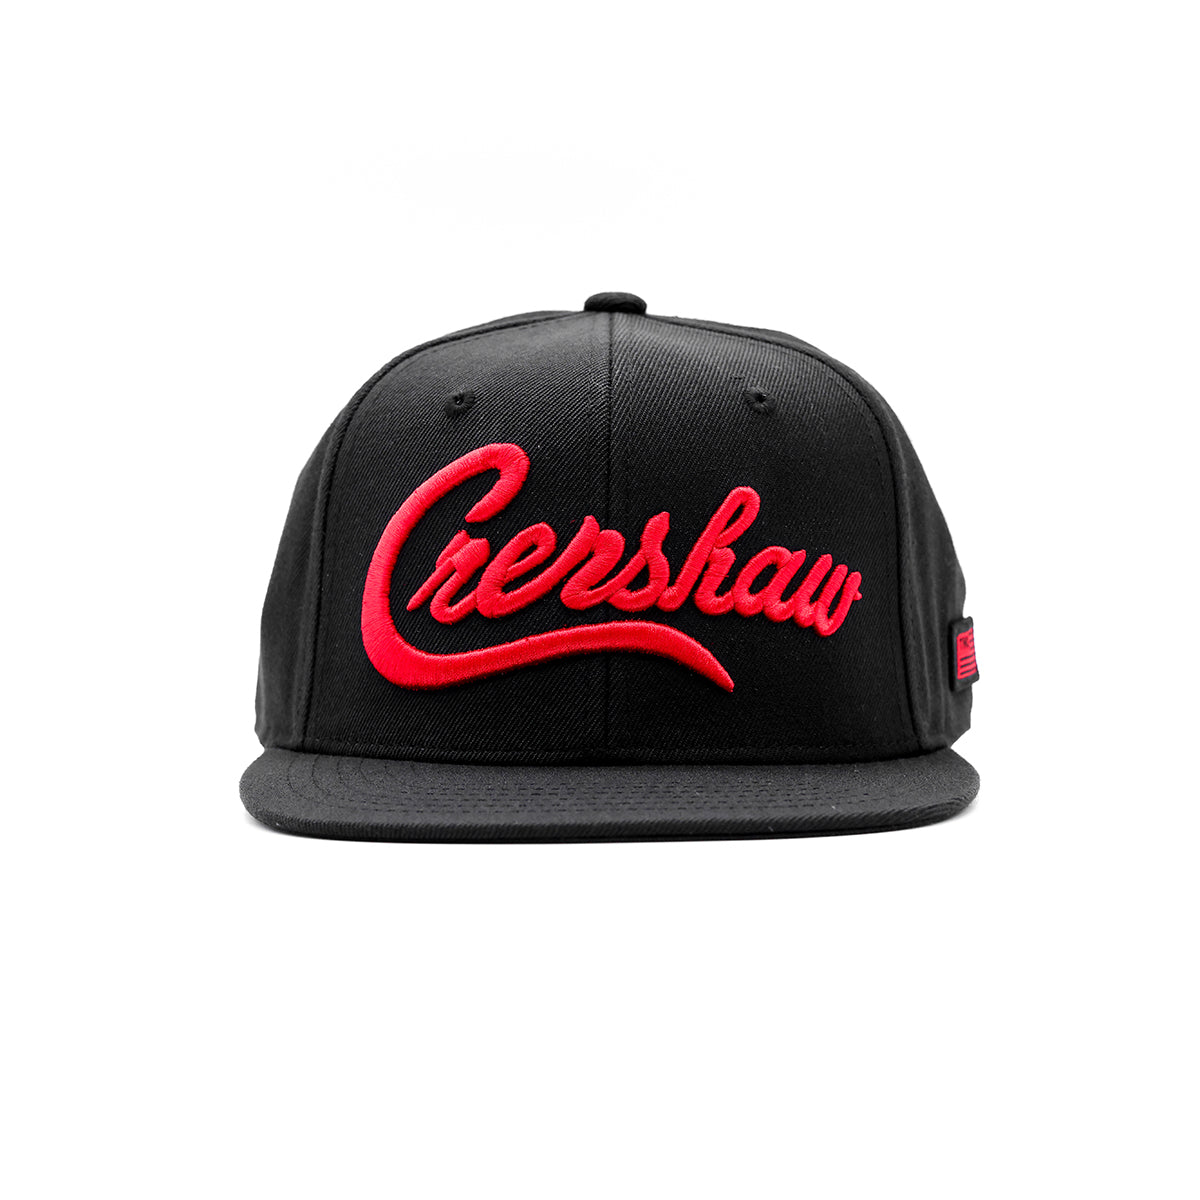 Crenshaw Limited Edition Snapback - Black/Red [3D] - Front